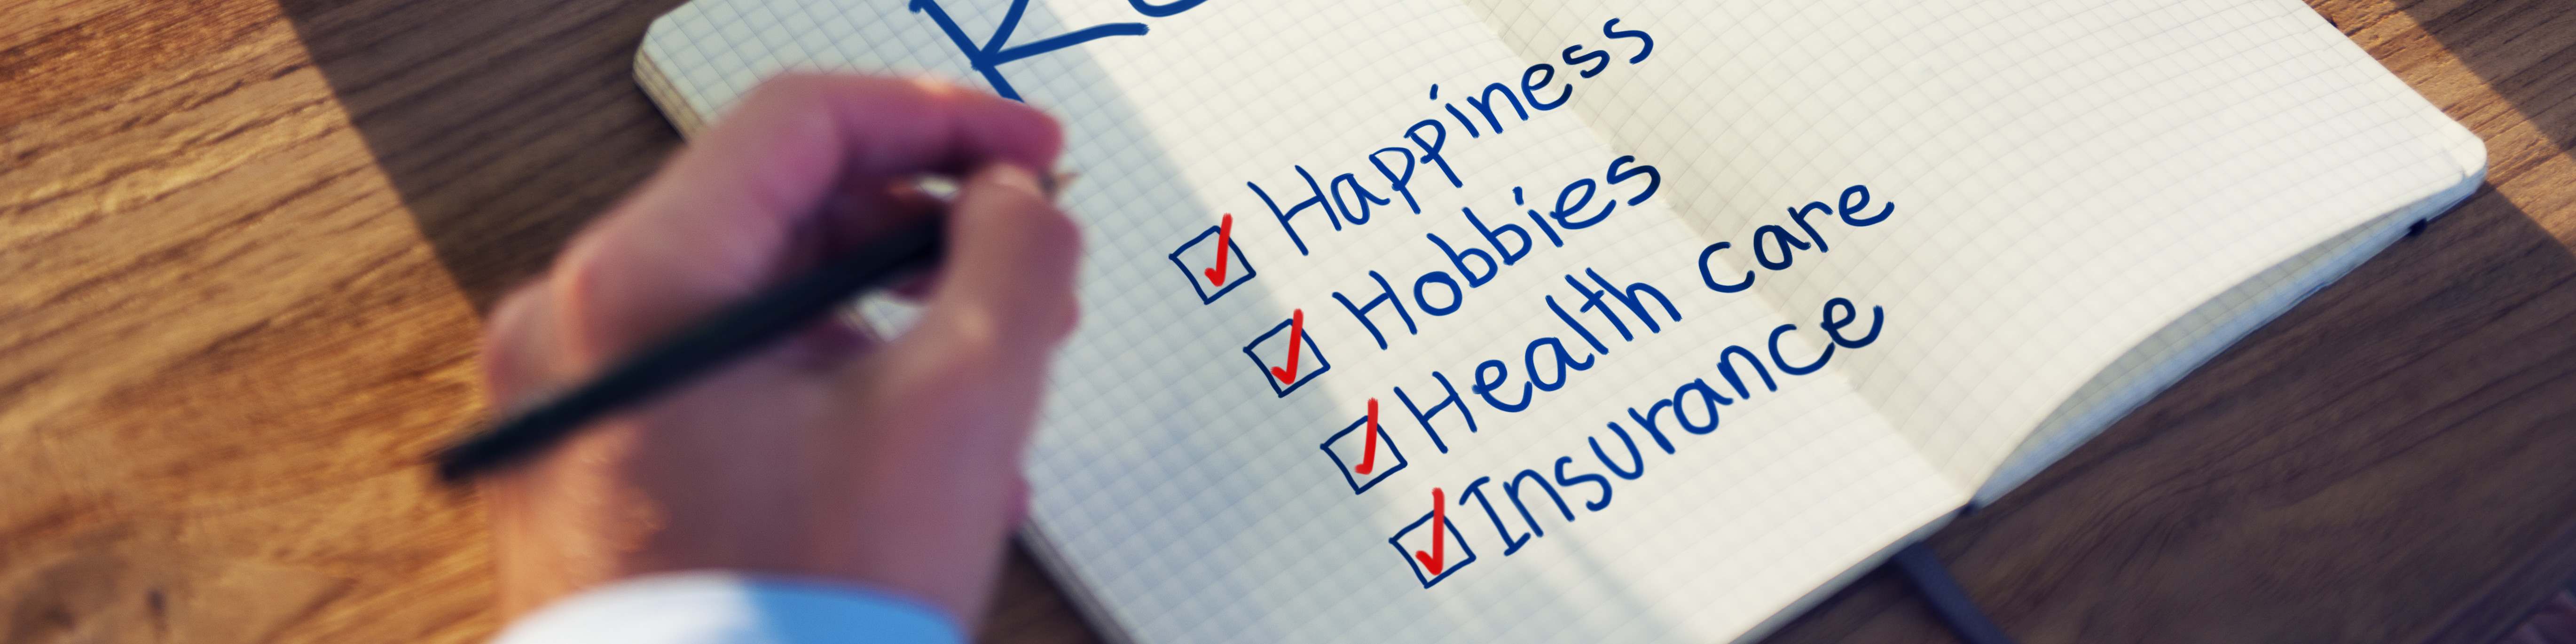 checklist on paper with happiness, hobbies, health care, and insurance checked